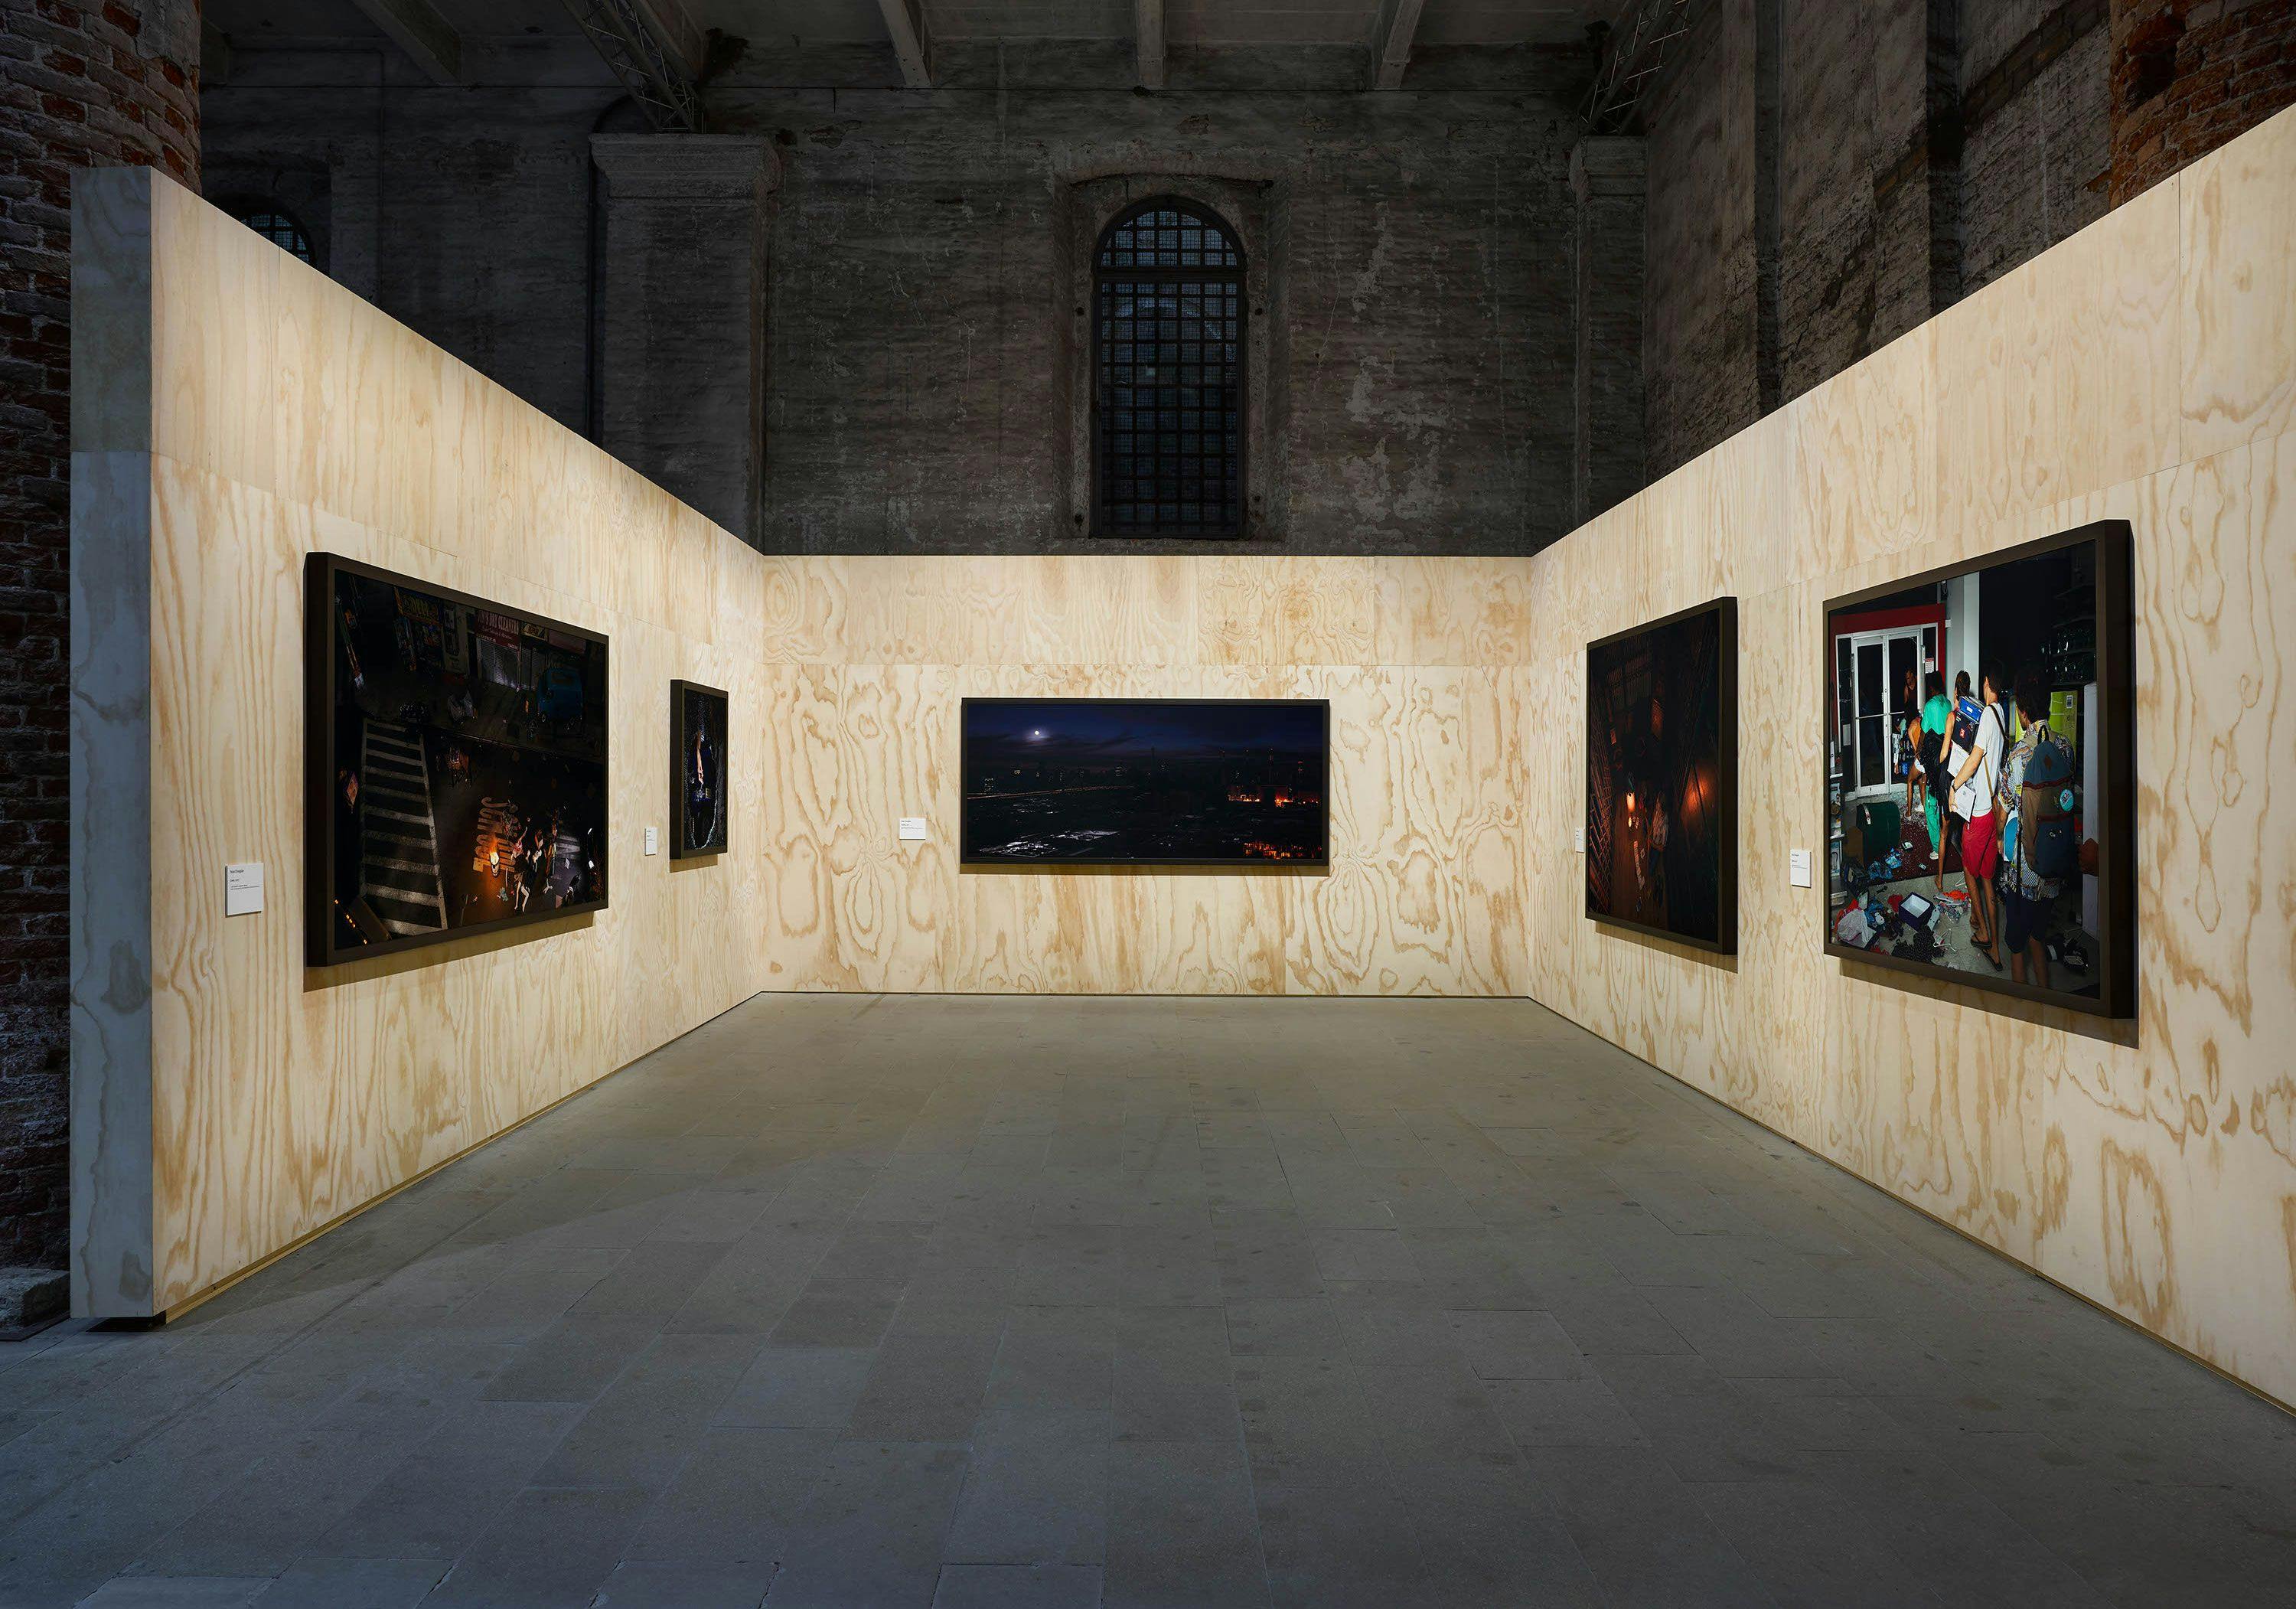 Installation view of Stan Douglas: Scenes from the Blackout at the 58th Venice Biennale, titled May You Live in Interesting Times, dated 2019